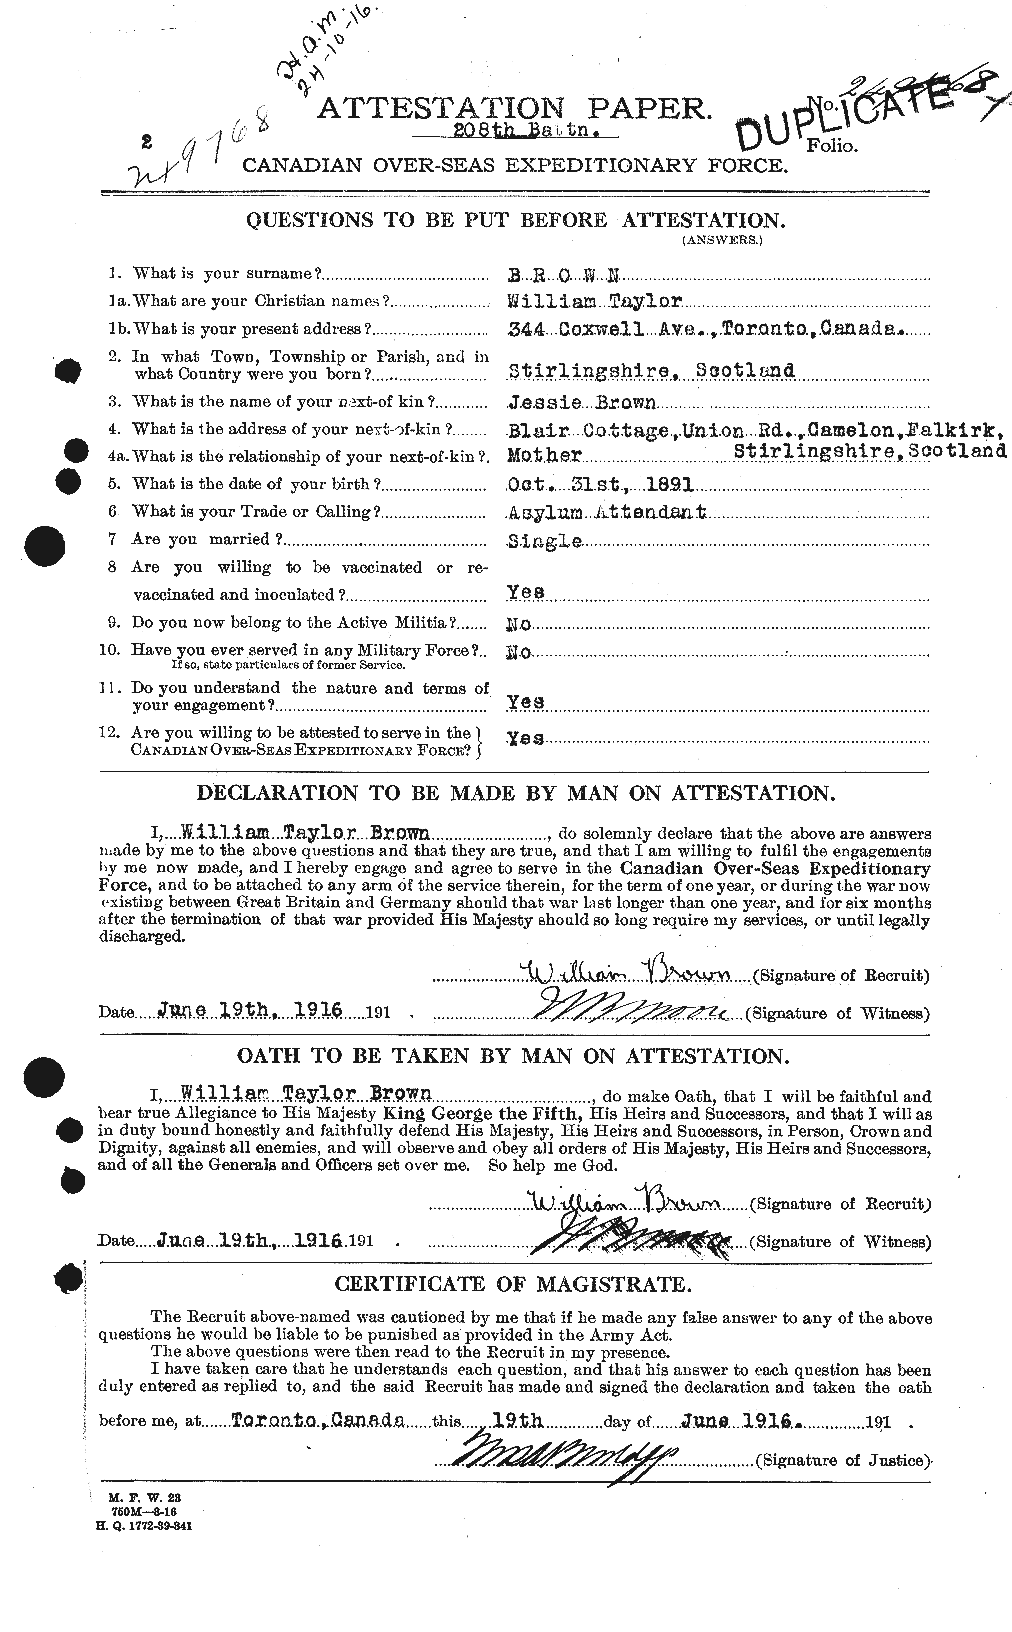 Personnel Records of the First World War - CEF 270323a